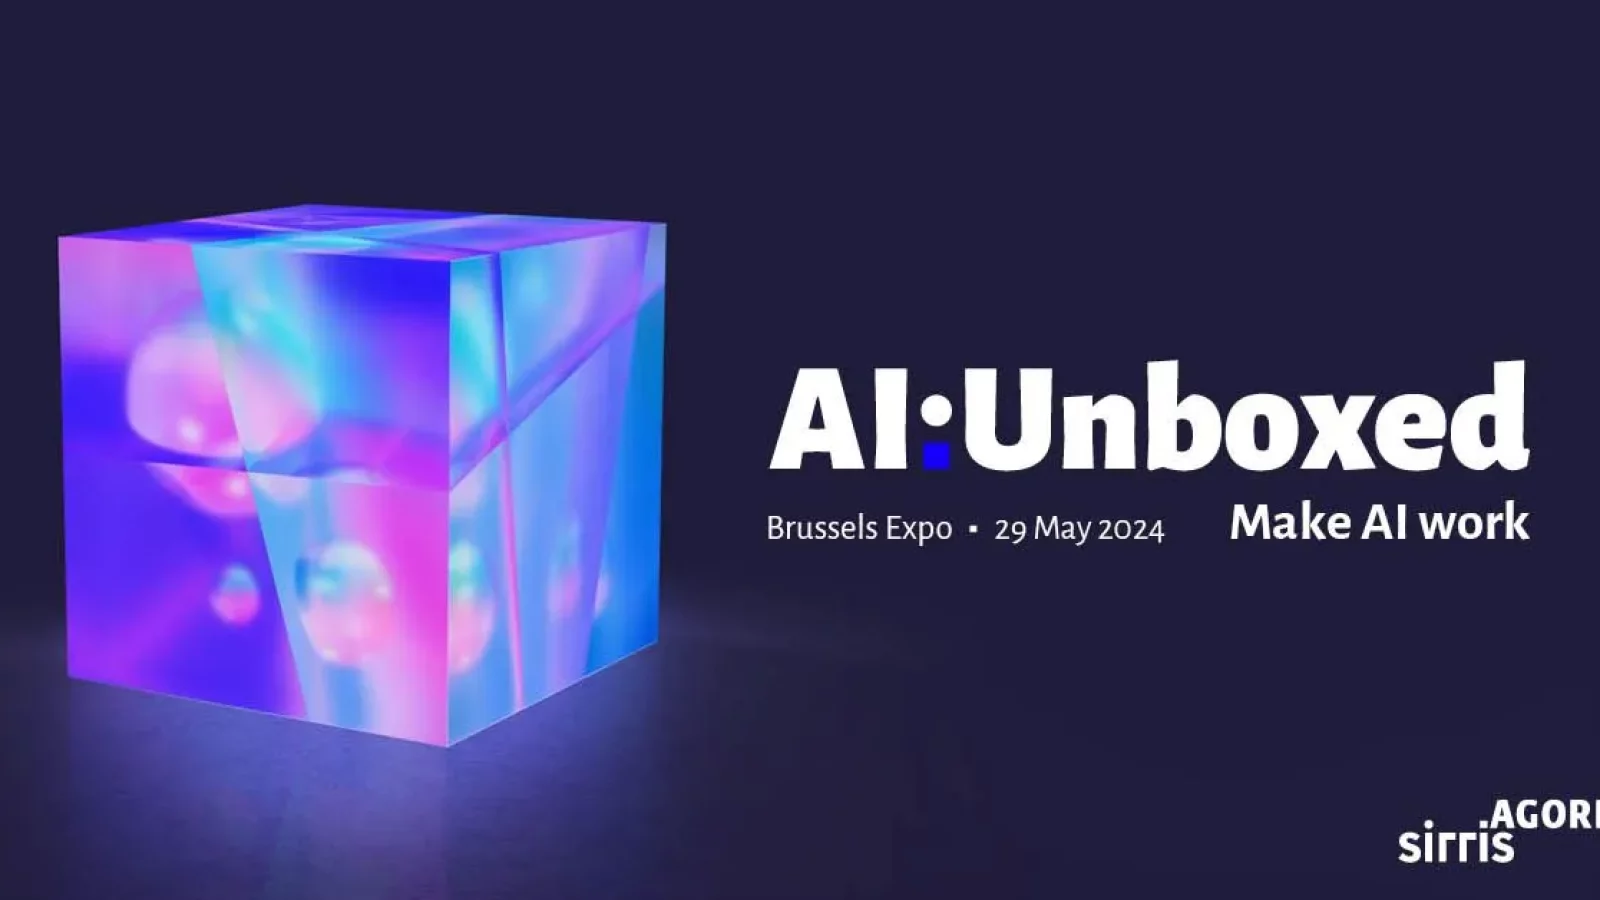 Banner image for 'AI Unboxed', an event on May 29th at Brussels Expo, featuring a modern design with the event name, date, and venue highlighted, set against a technology-themed background.